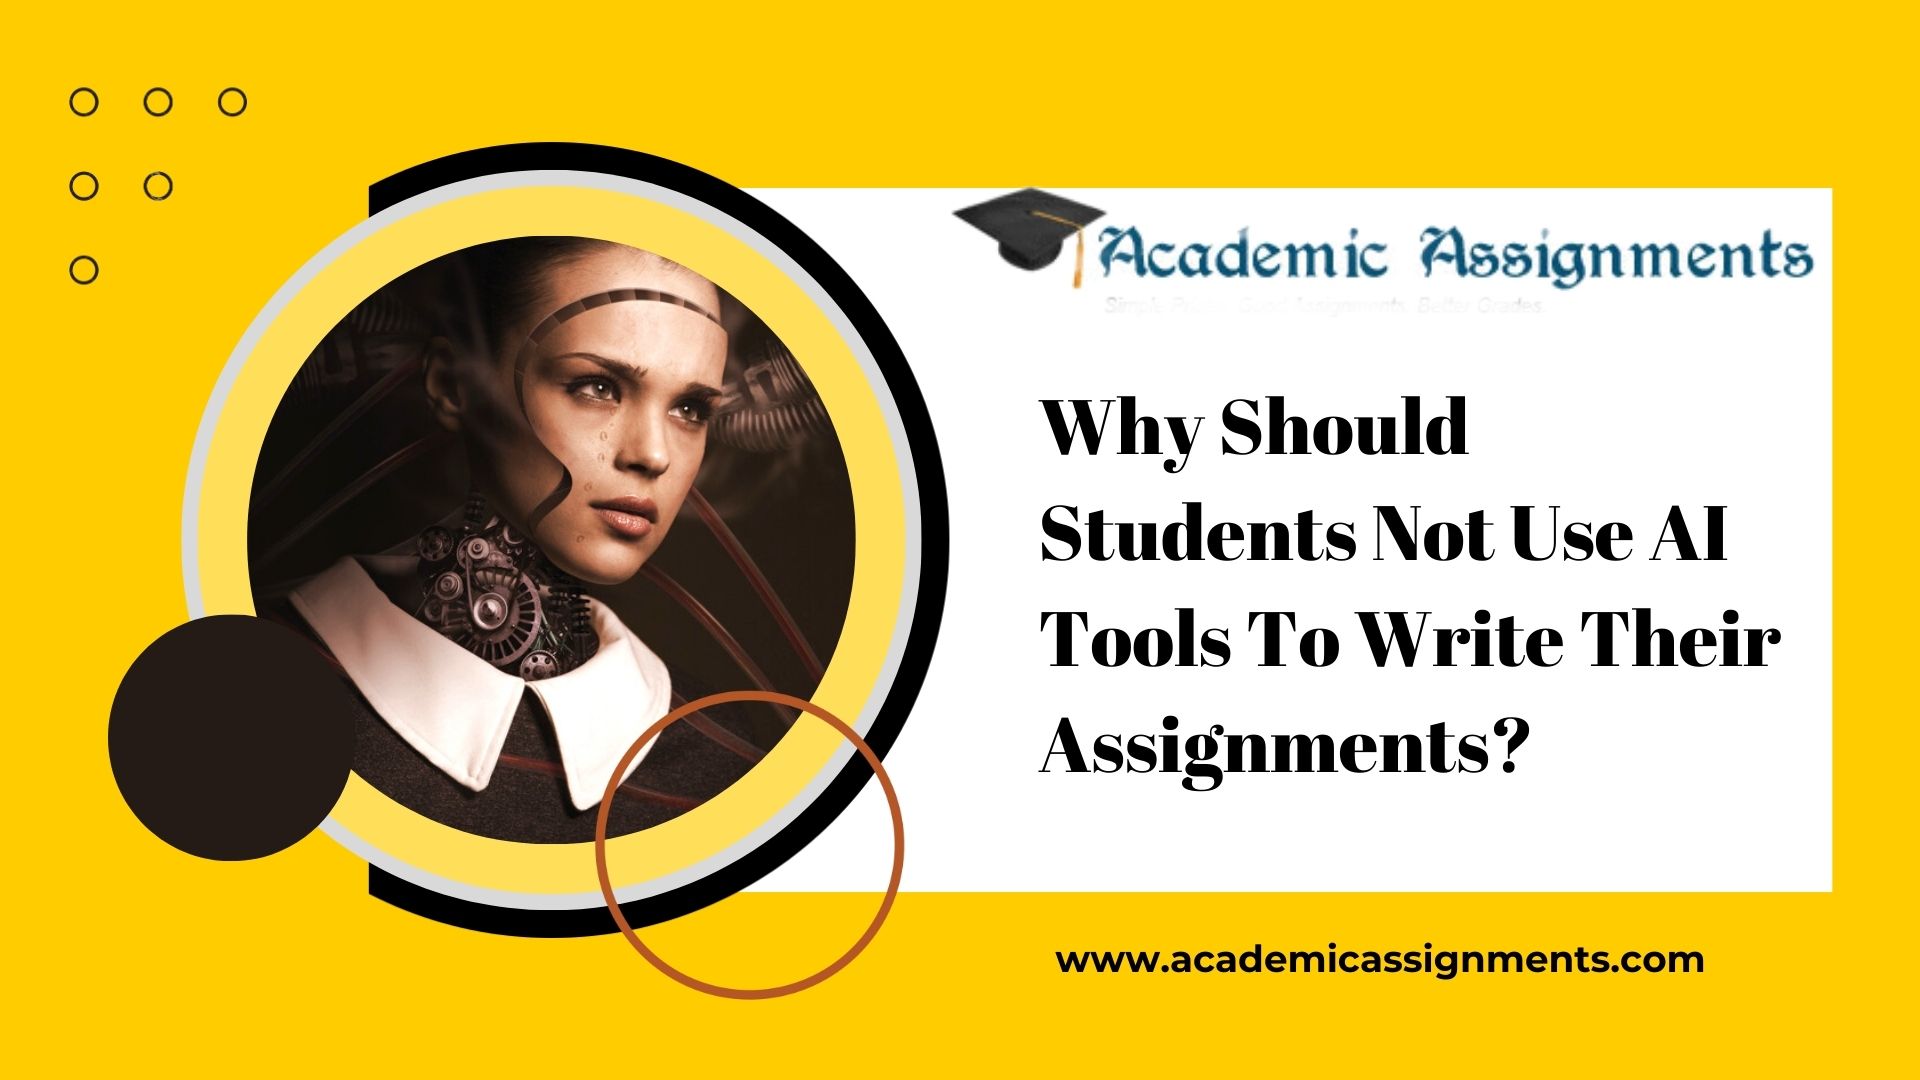 Why Should Students Not Use AI Tools To Write Their Assignments